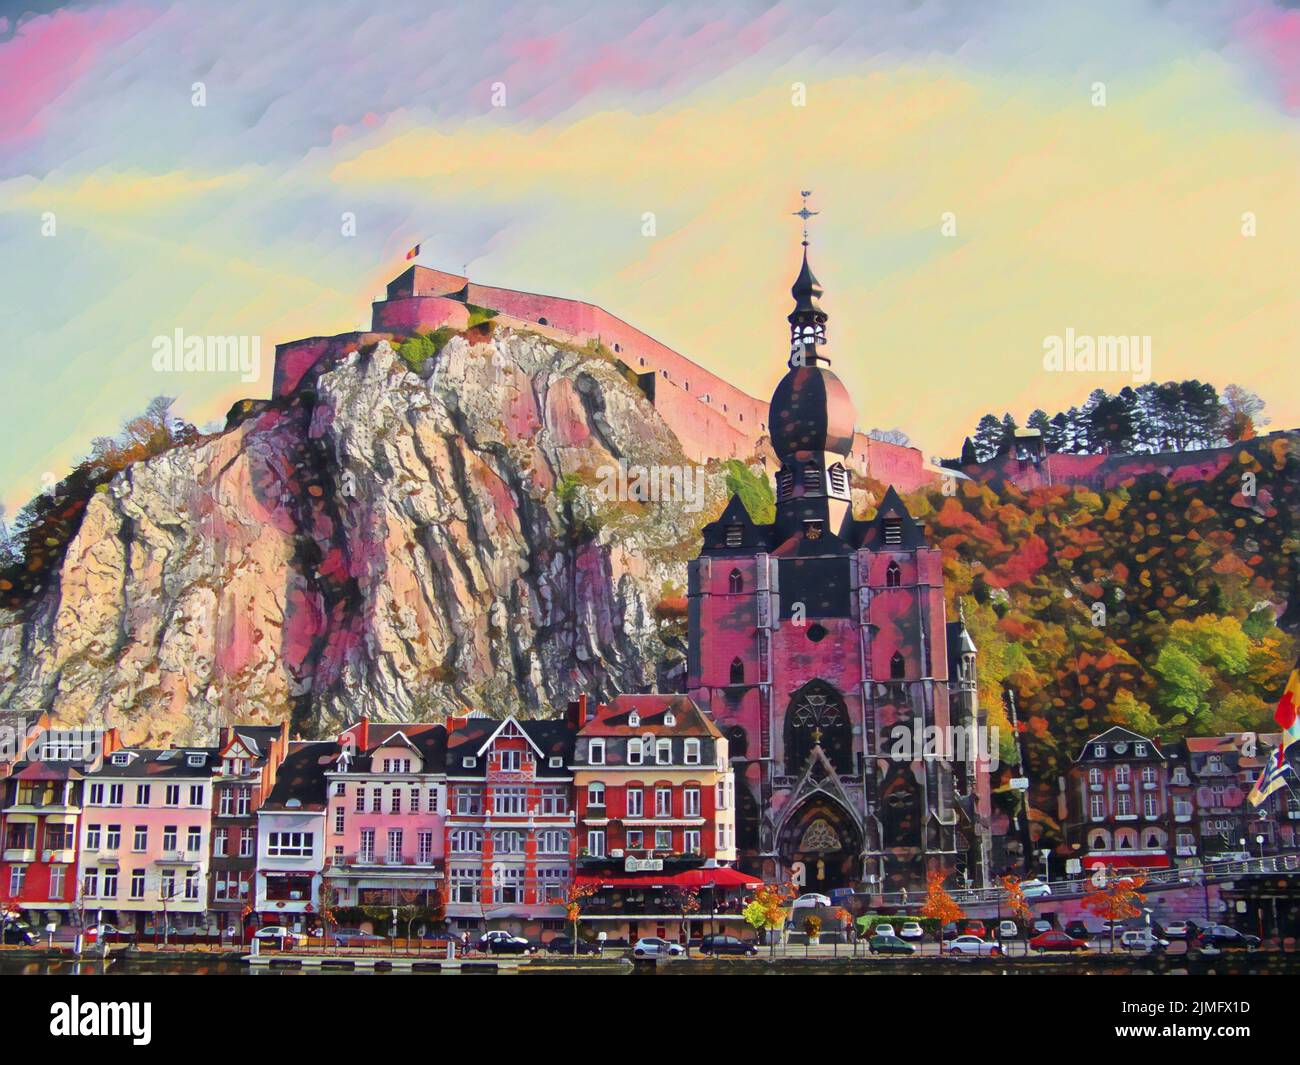 The mixed media image of the city of Dinant, Belgium. The Citadel is built on high cliffs, a collegiate church, and brightly colored buildings. Stock Photo